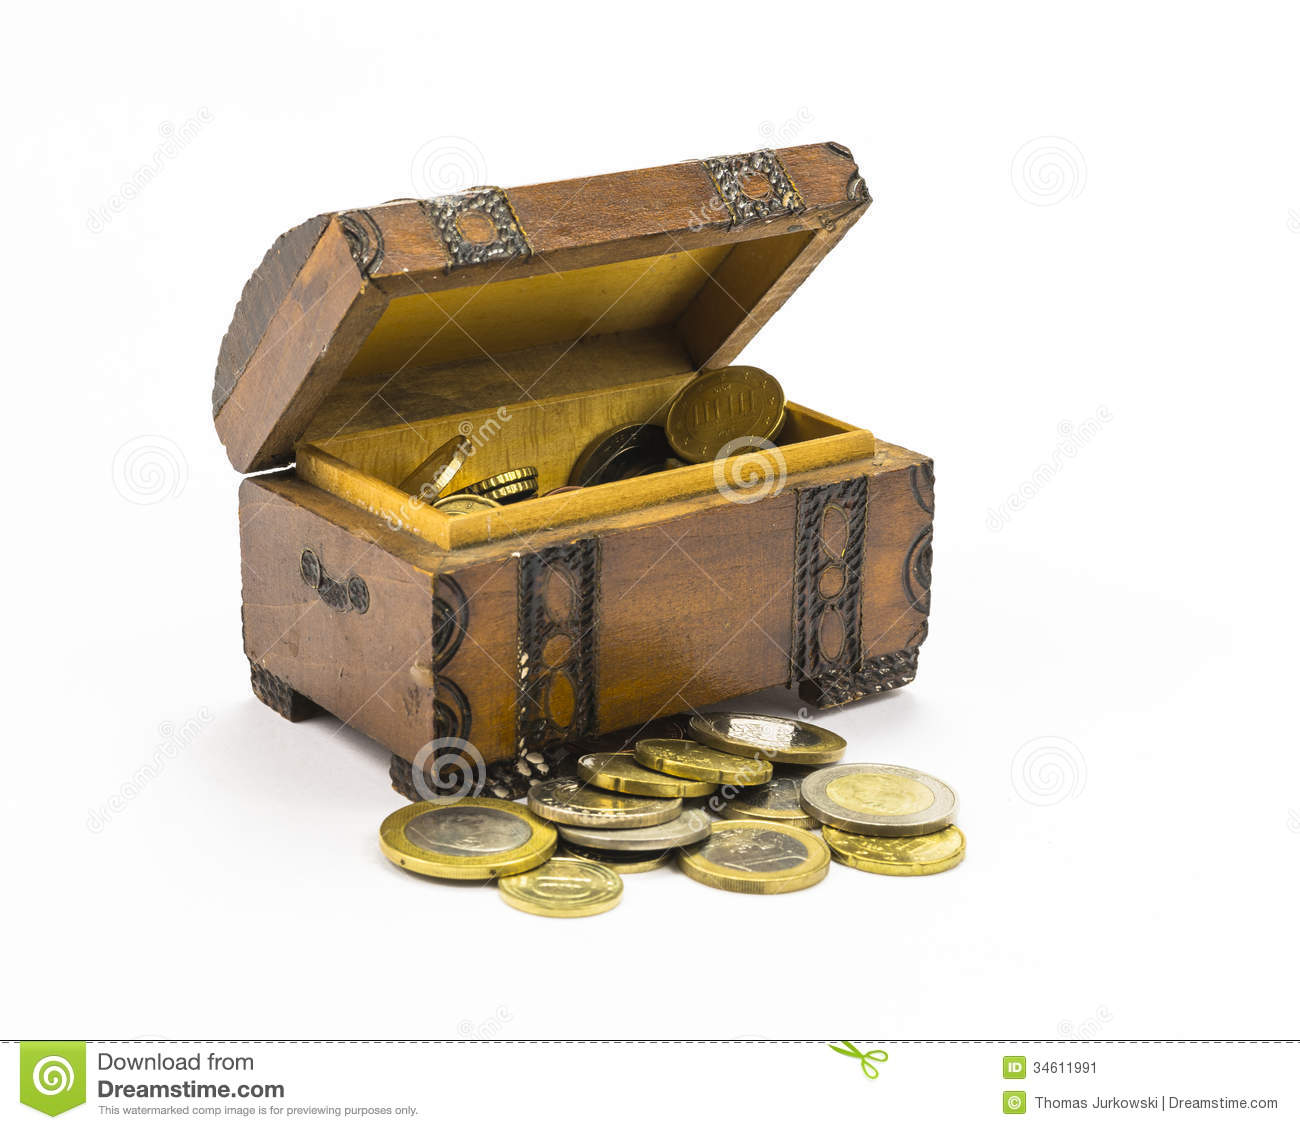 Coins In The Box Stock Image   Image  34611991